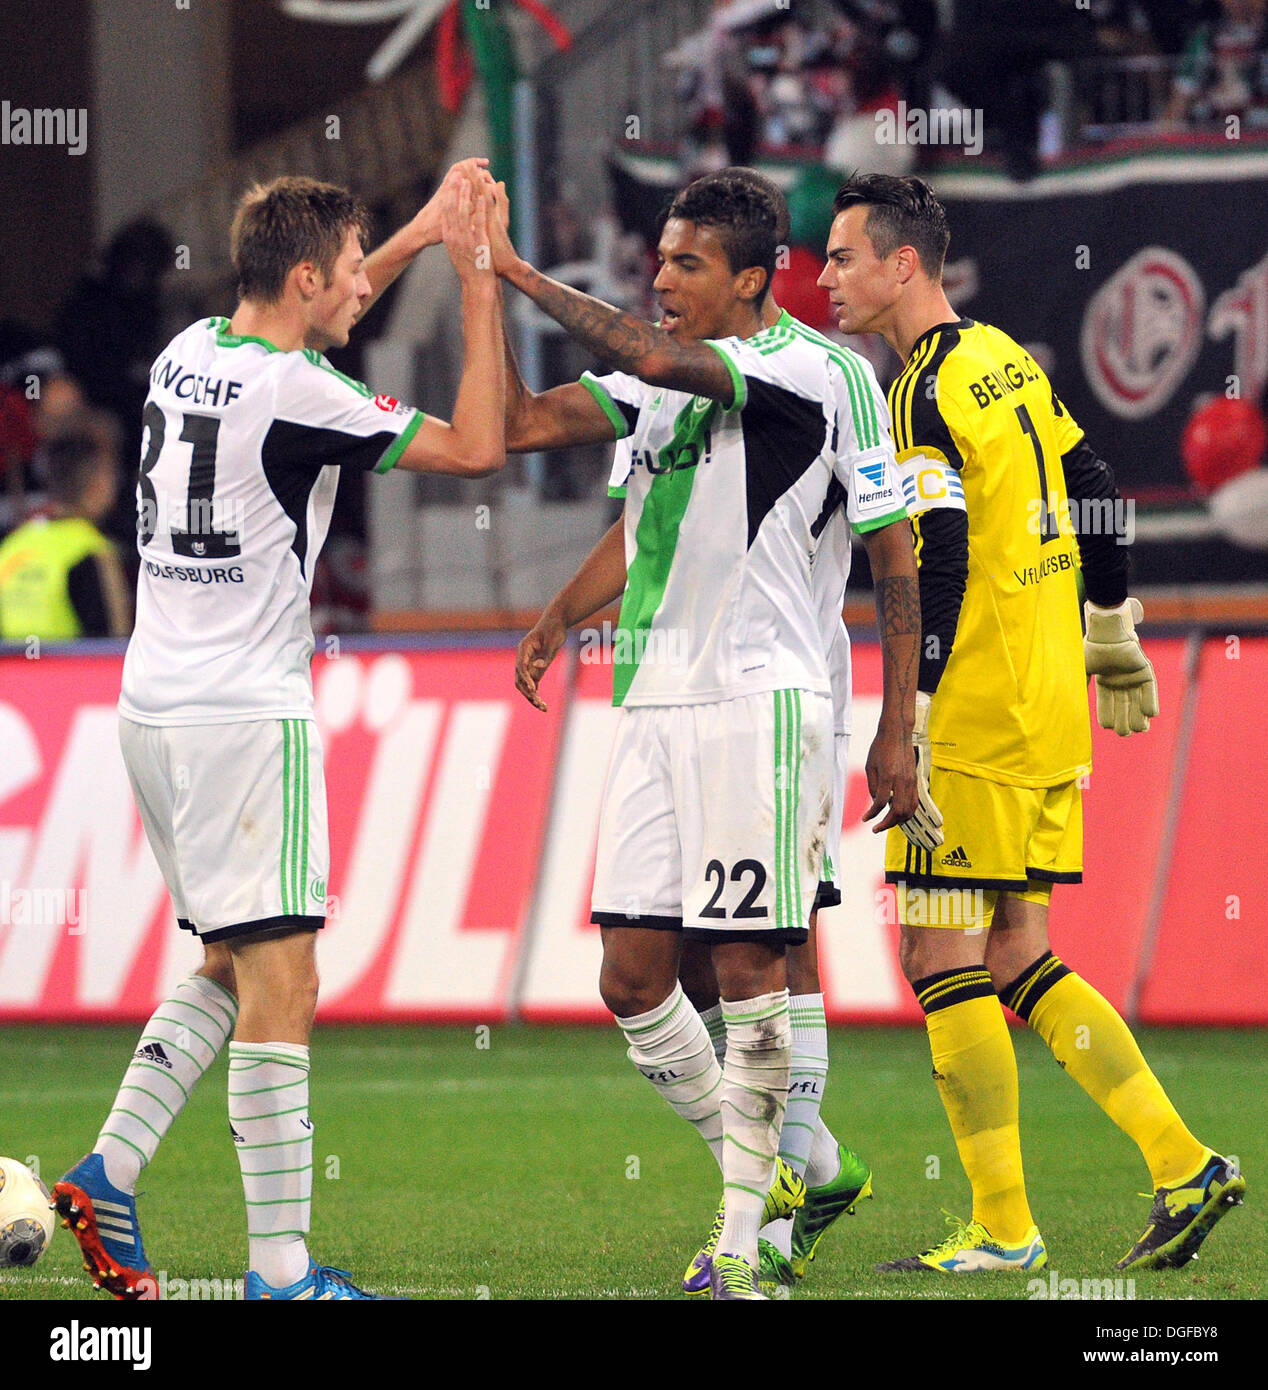 Augsburg, Germany. 20th Oct, 2013. Wolfsburg's Robin Knoche, Luiz Gustavo and goalkeeper Diego Benaglio celebrate the 2-1 victory in the German Bundesliga soccer match between FC Augsburg and VfL Wolfsburg at the SGL-Arena in Augsburg, Germany, 20 October 2013. Photo: STEFAN PUCHNER (ATTENTION: Due to the accreditation guidelines, the DFL only permits the publication and utilisation of up to 15 pictures per match on the internet and in online media during the match.)/dpa/Alamy Live News Stock Photo